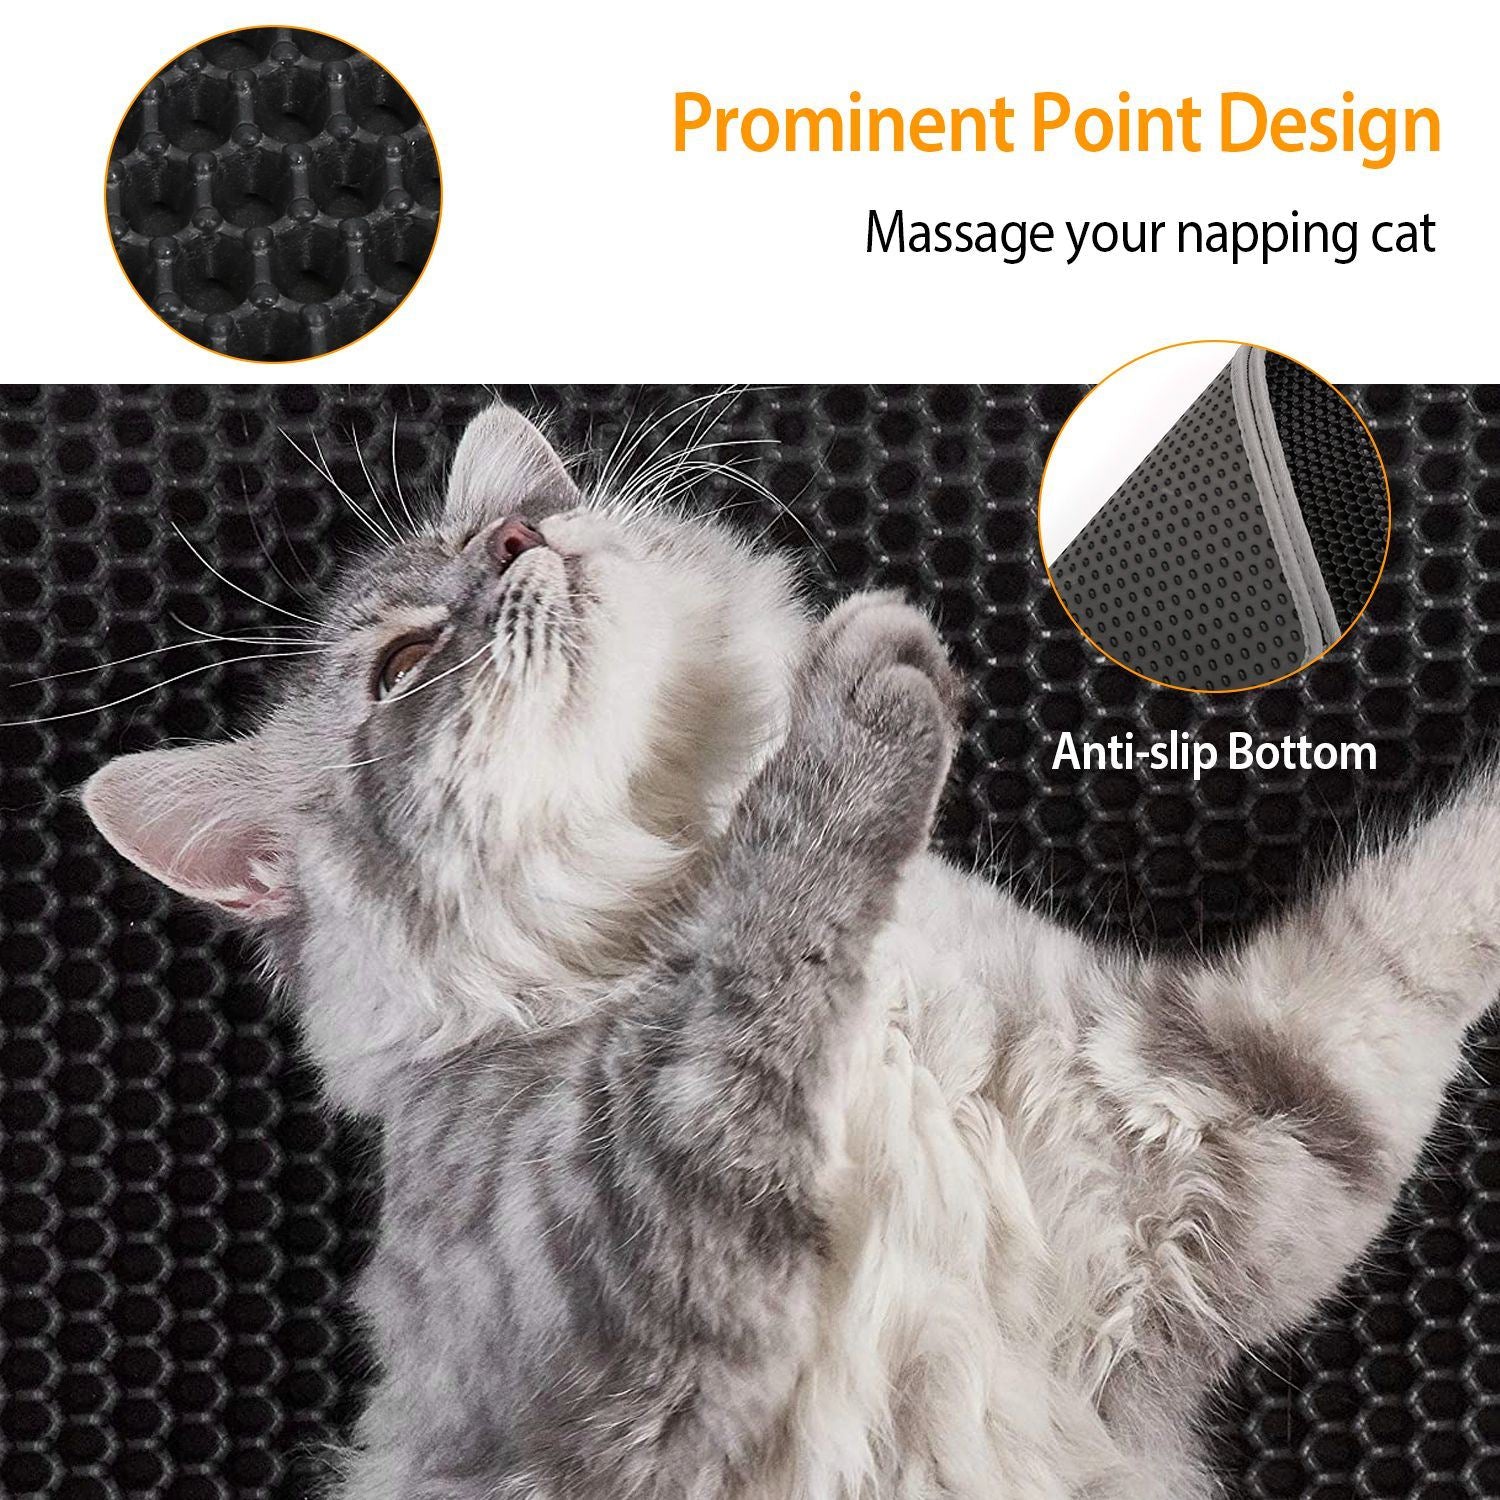 Cat Litter Mat, Kitty Litter Trapping Mat, Double Layer Mats with MiLi  Shape Scratching design, Urine Waterproof, Easy Clean, Scatter Control 21  x